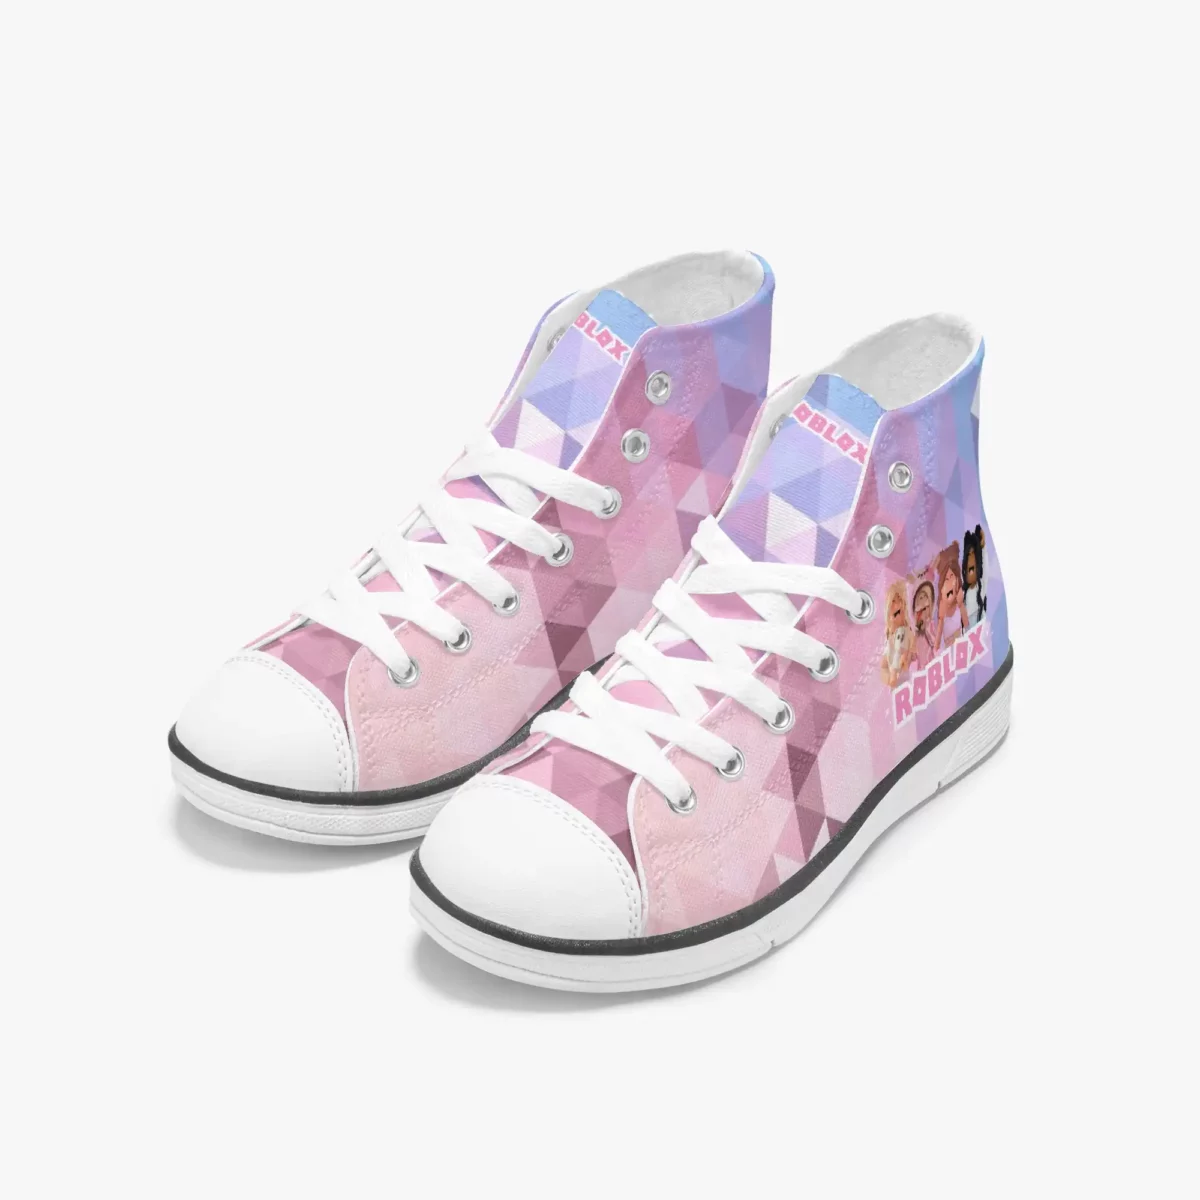 Roblox Girls Personalized High-Top Sneakers for Children – Pink and Purple geometric background Cool Kiddo 10